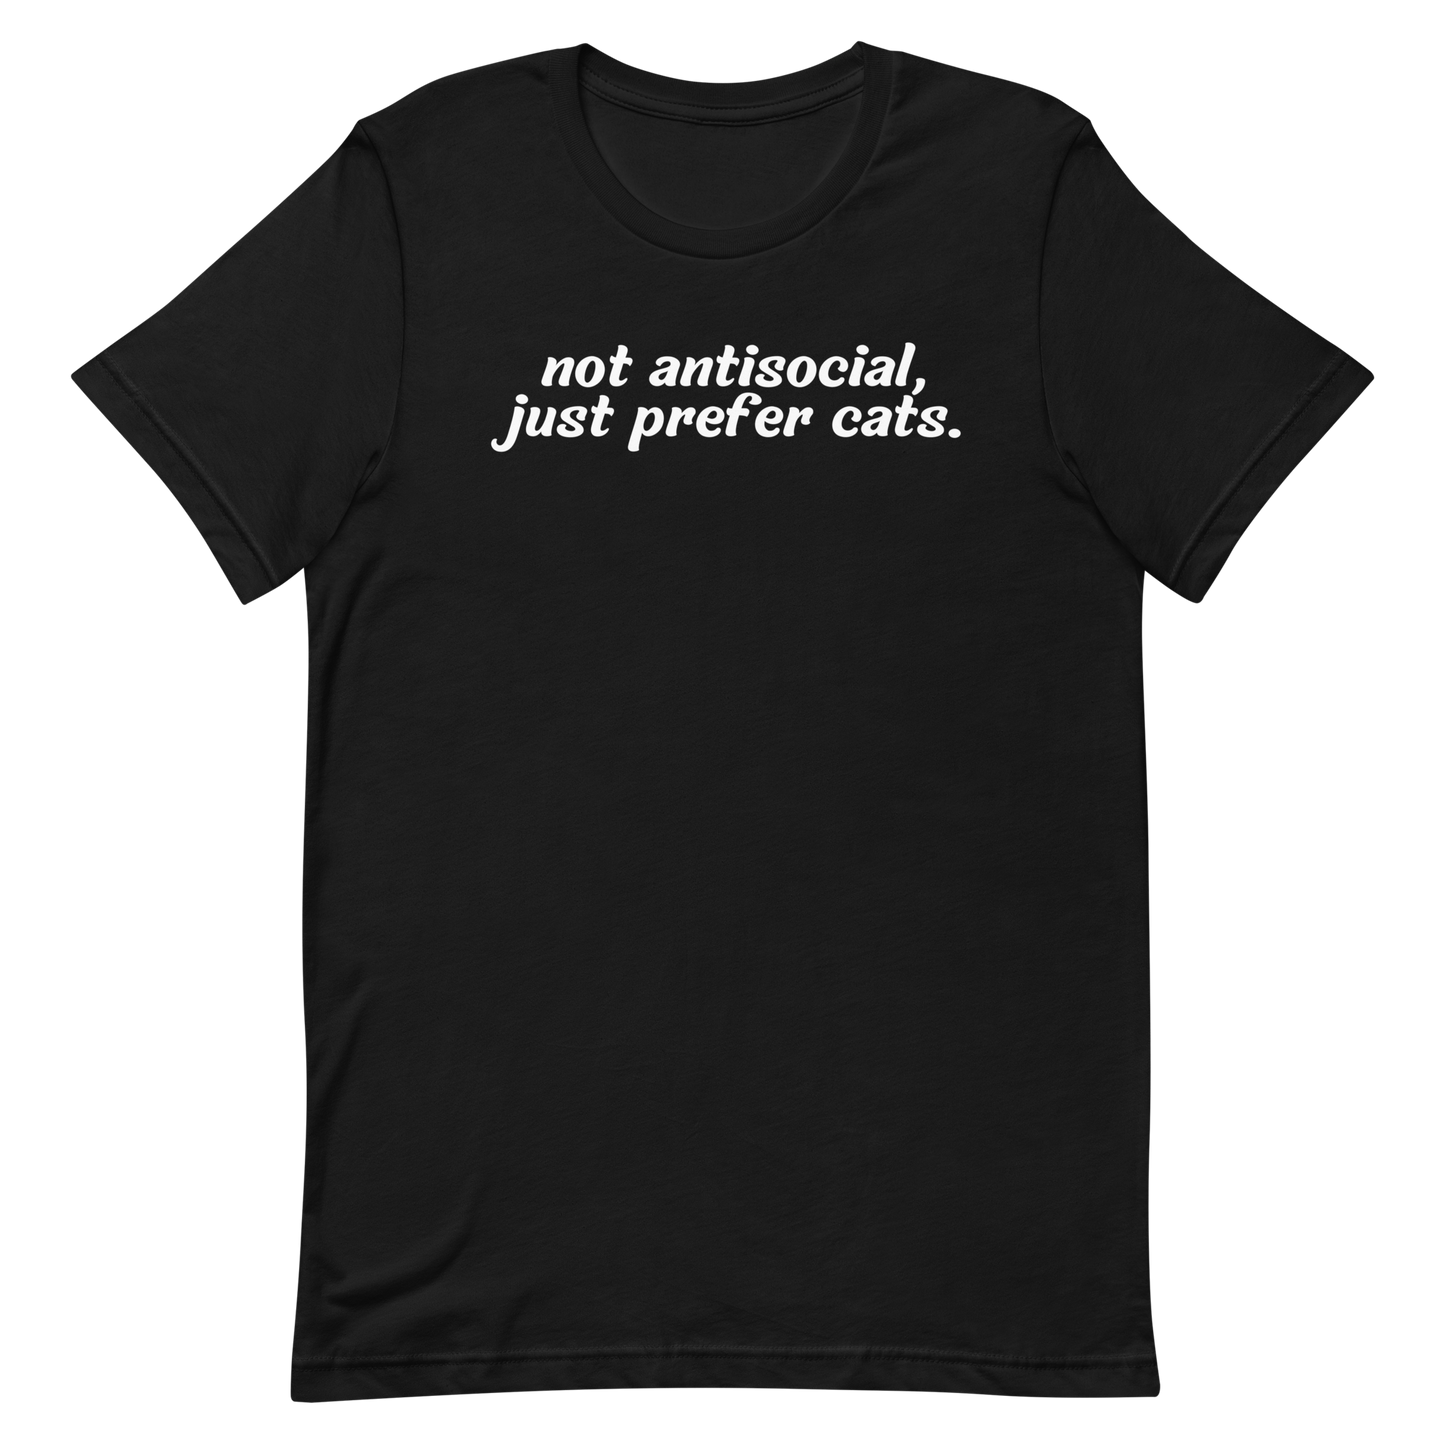 not antisocial, just prefer cats. - Unisex Classic Tee